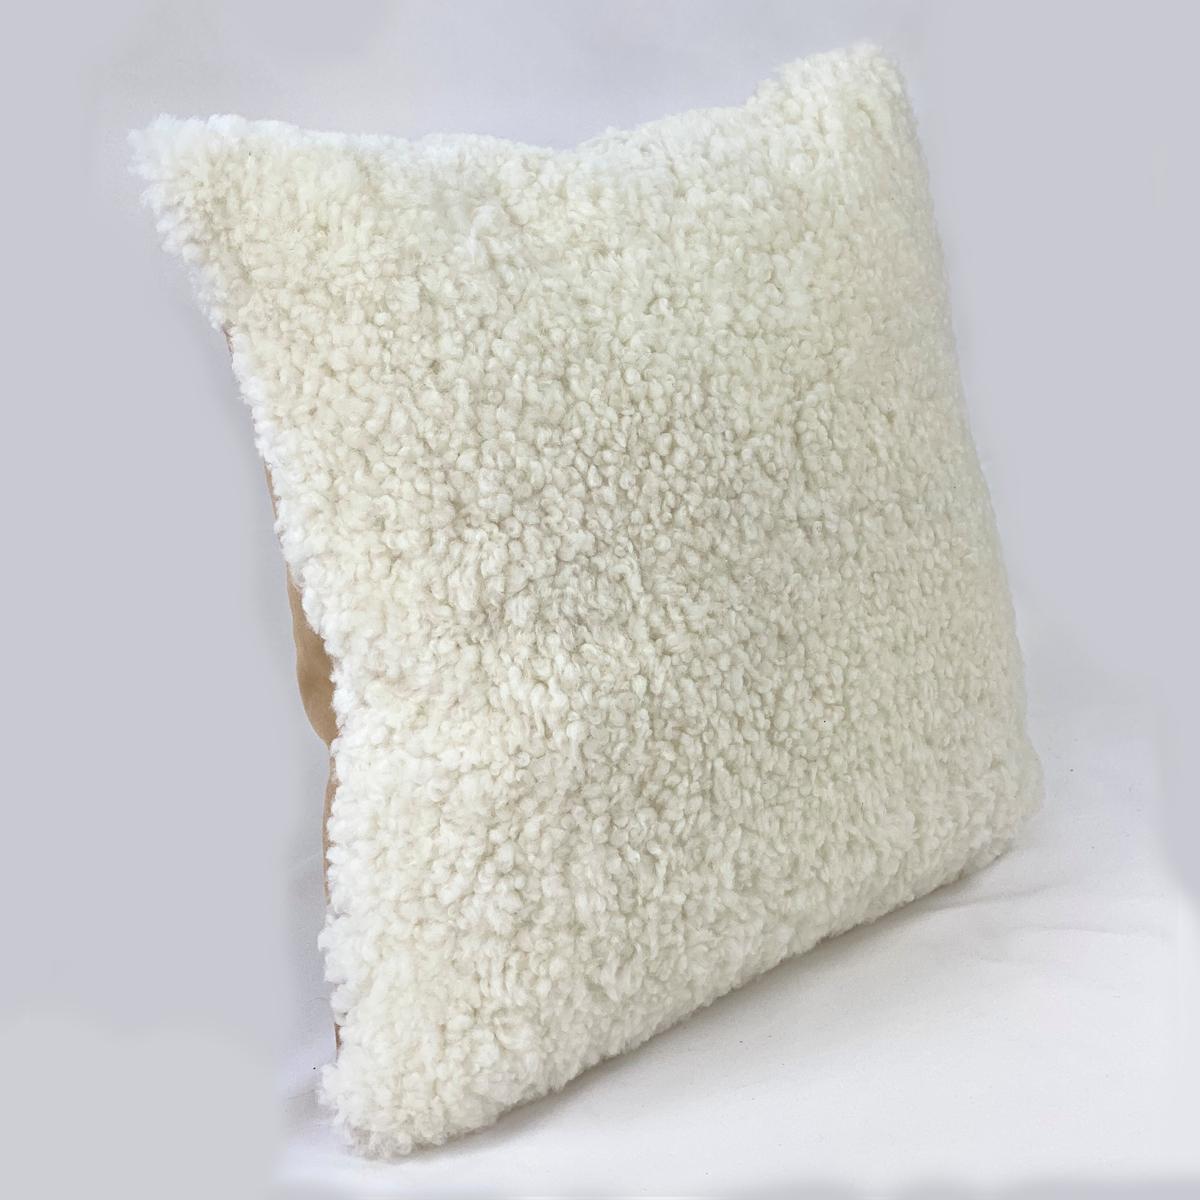 Elevate the cozy natural textures to your interior with this white shearling pillow. The sheepskin wool features a short and curly wool pile that will add inviting textures to a room. Part of the boucle collection, this pillow translates